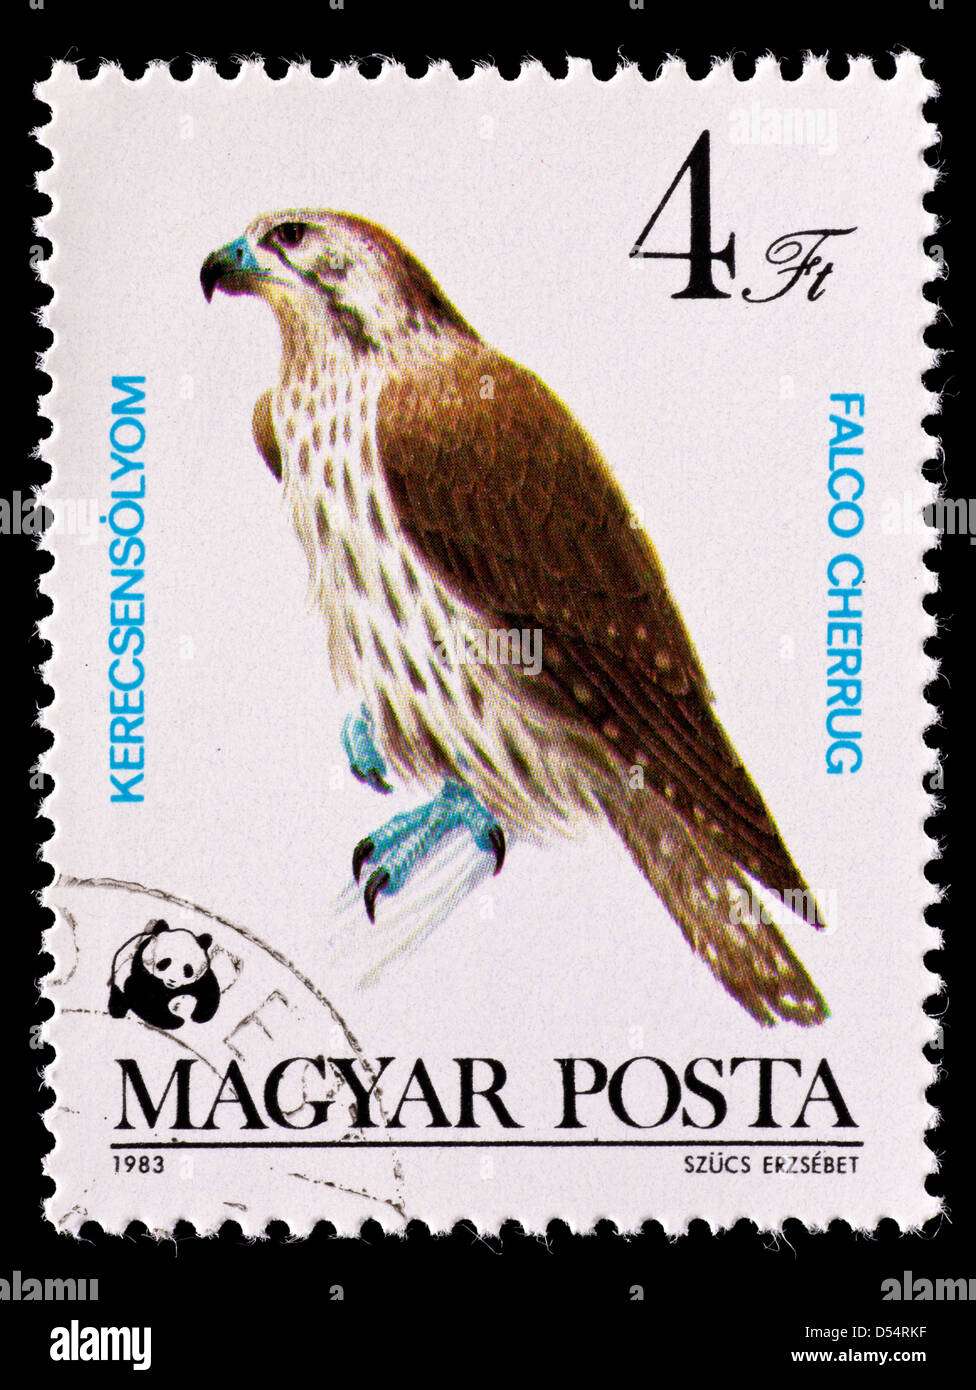 Postage stamp from Hungary depicting a White-tailed Sea-eagle  (Haliaetus albicilla) Stock Photo